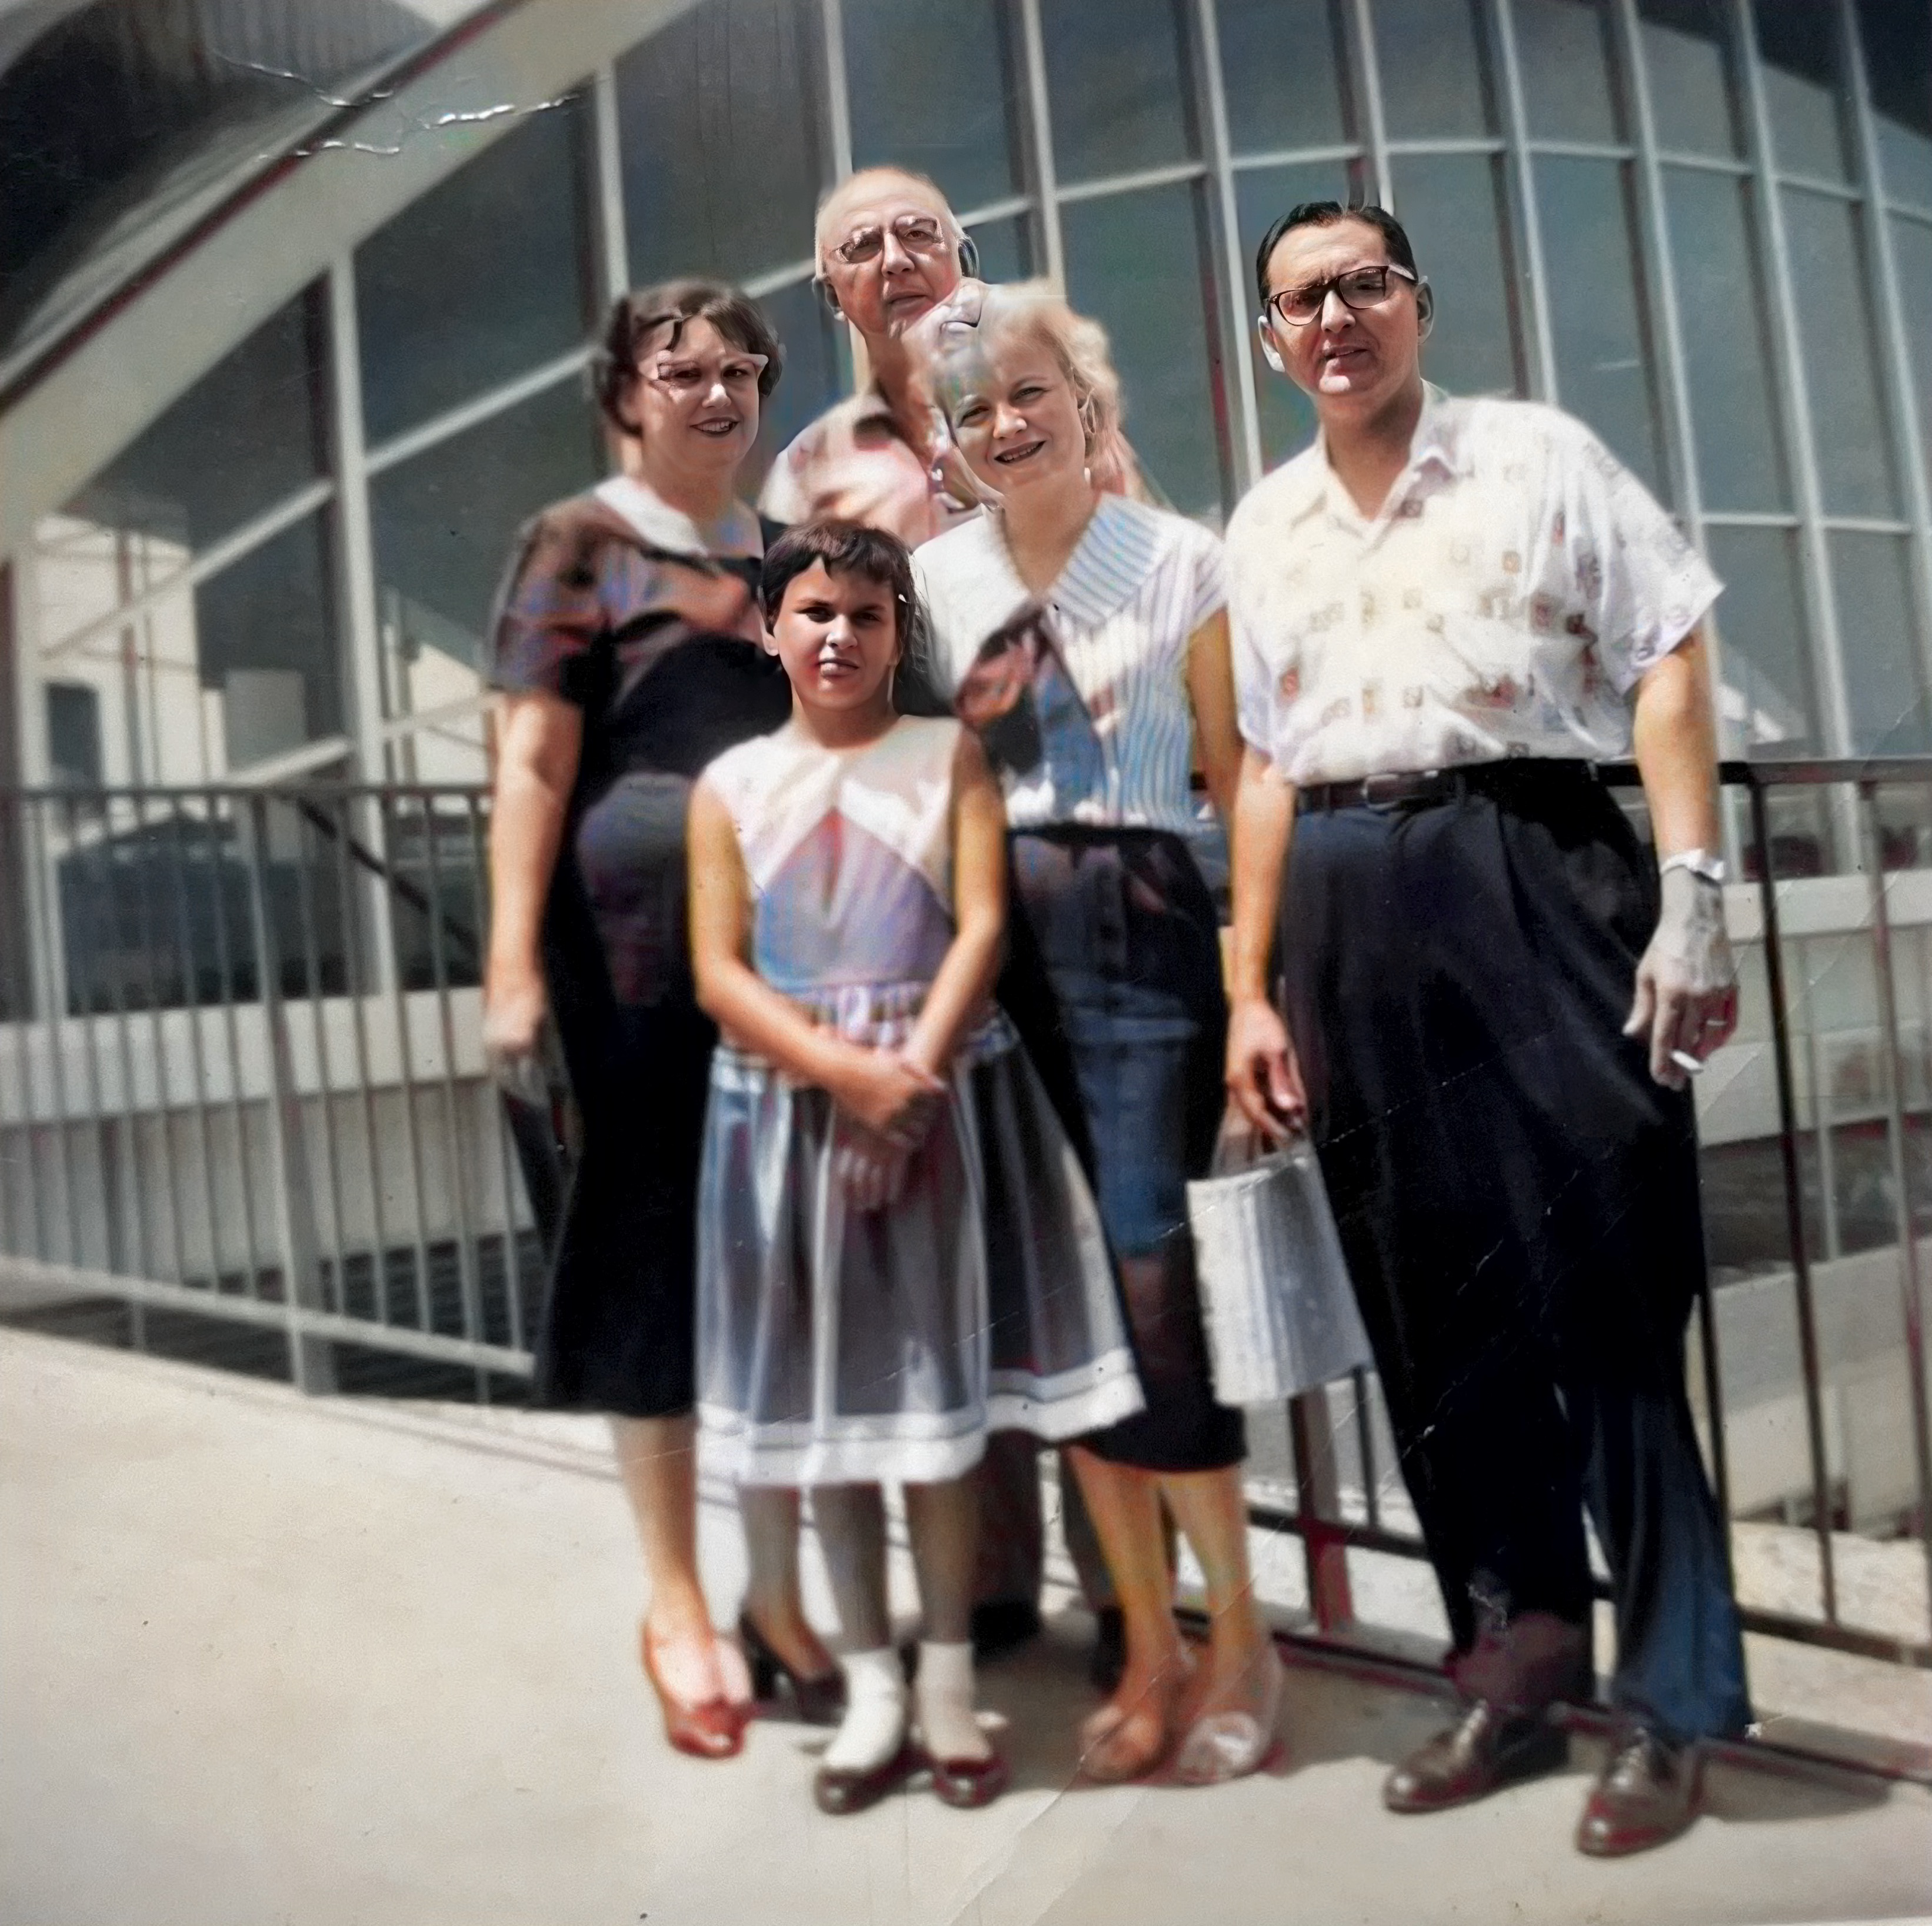 Maurice and Loudy Silverman with my parents and me at St. Louis airport about 1956.